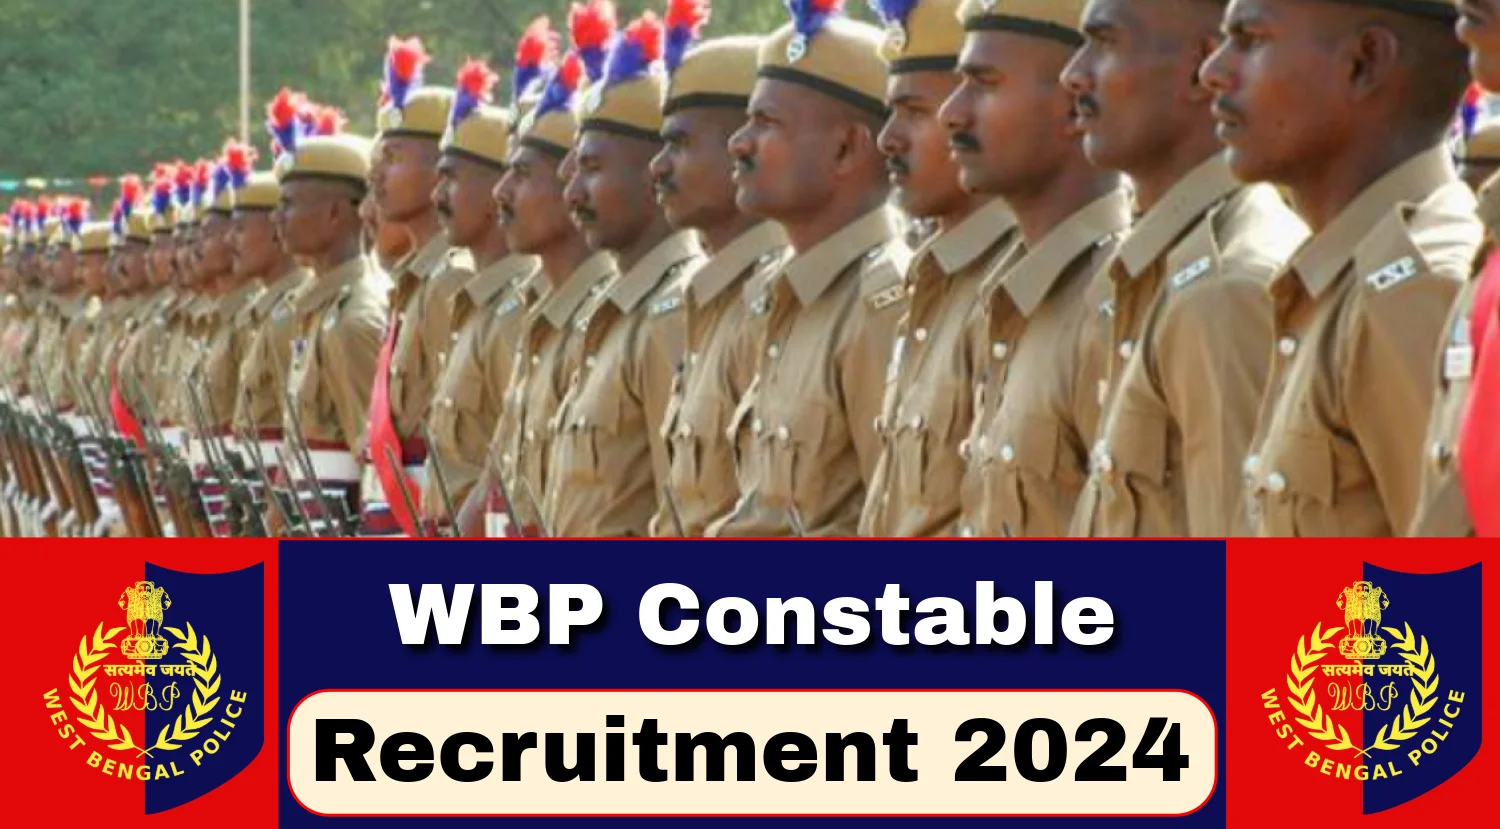 WBP Constable Recruitment Notification 2024, Check Eligibility, Exam Pattern, Selection Process Now